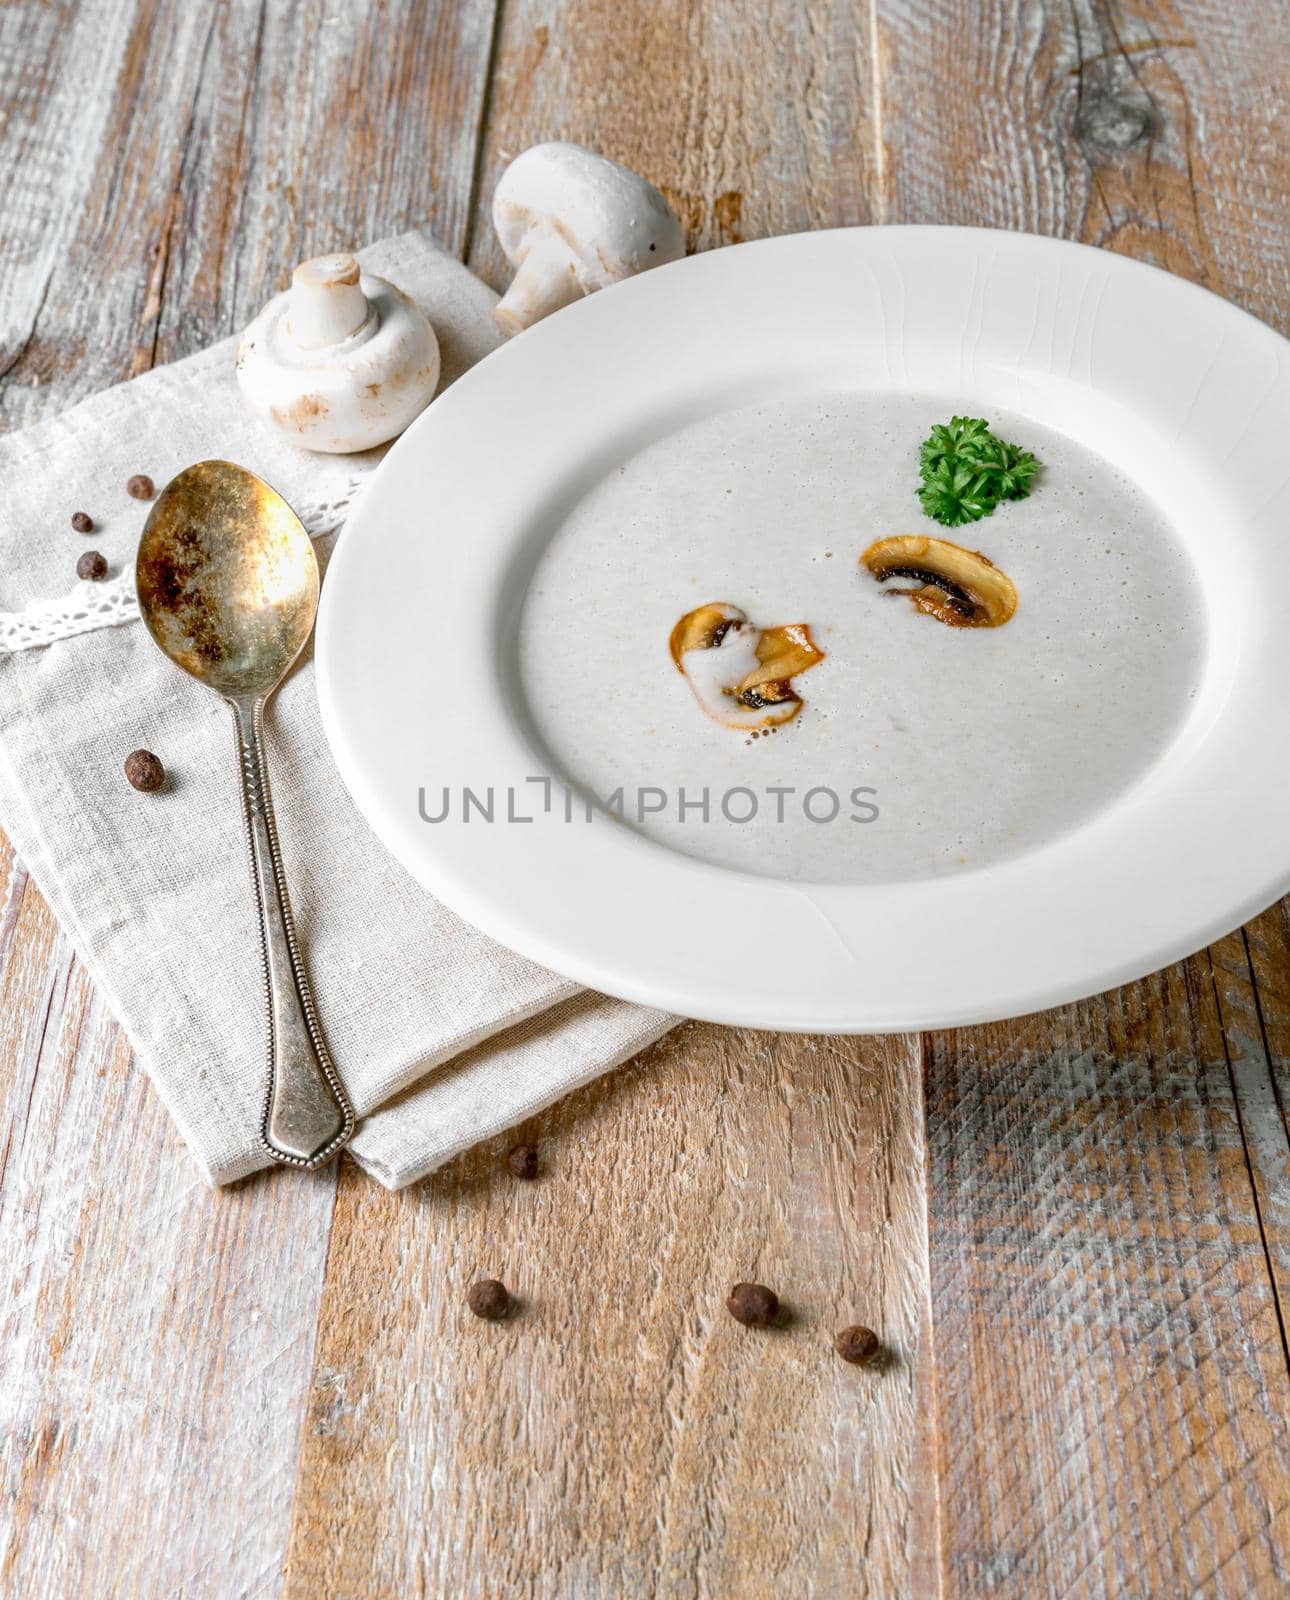 Delicious creamy mushroom soup with some pieces of mushrooms in it, old spoon and napkin